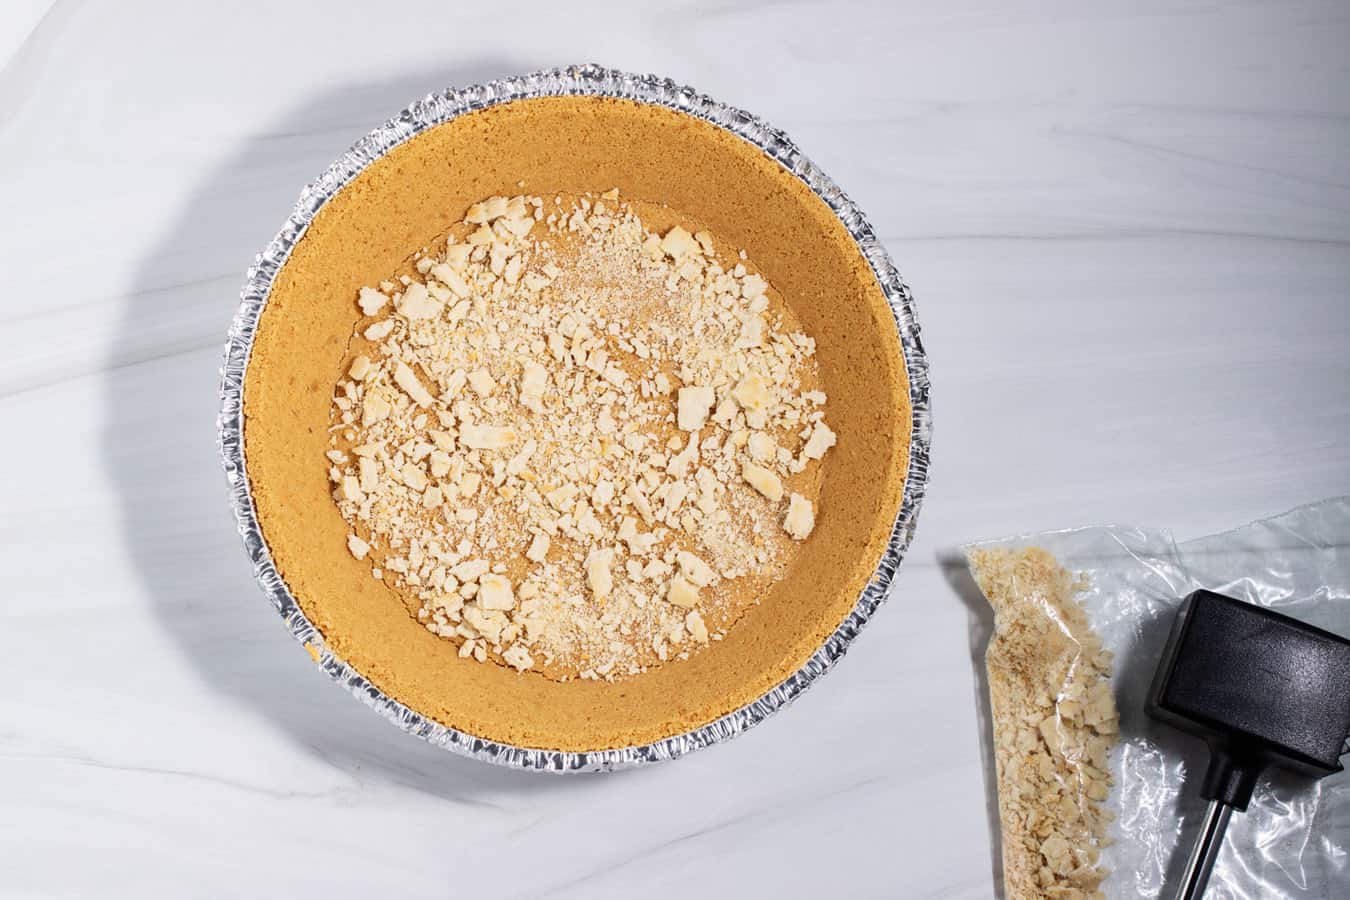 Premade graham cracker crust with crushed saltines in the bottom.